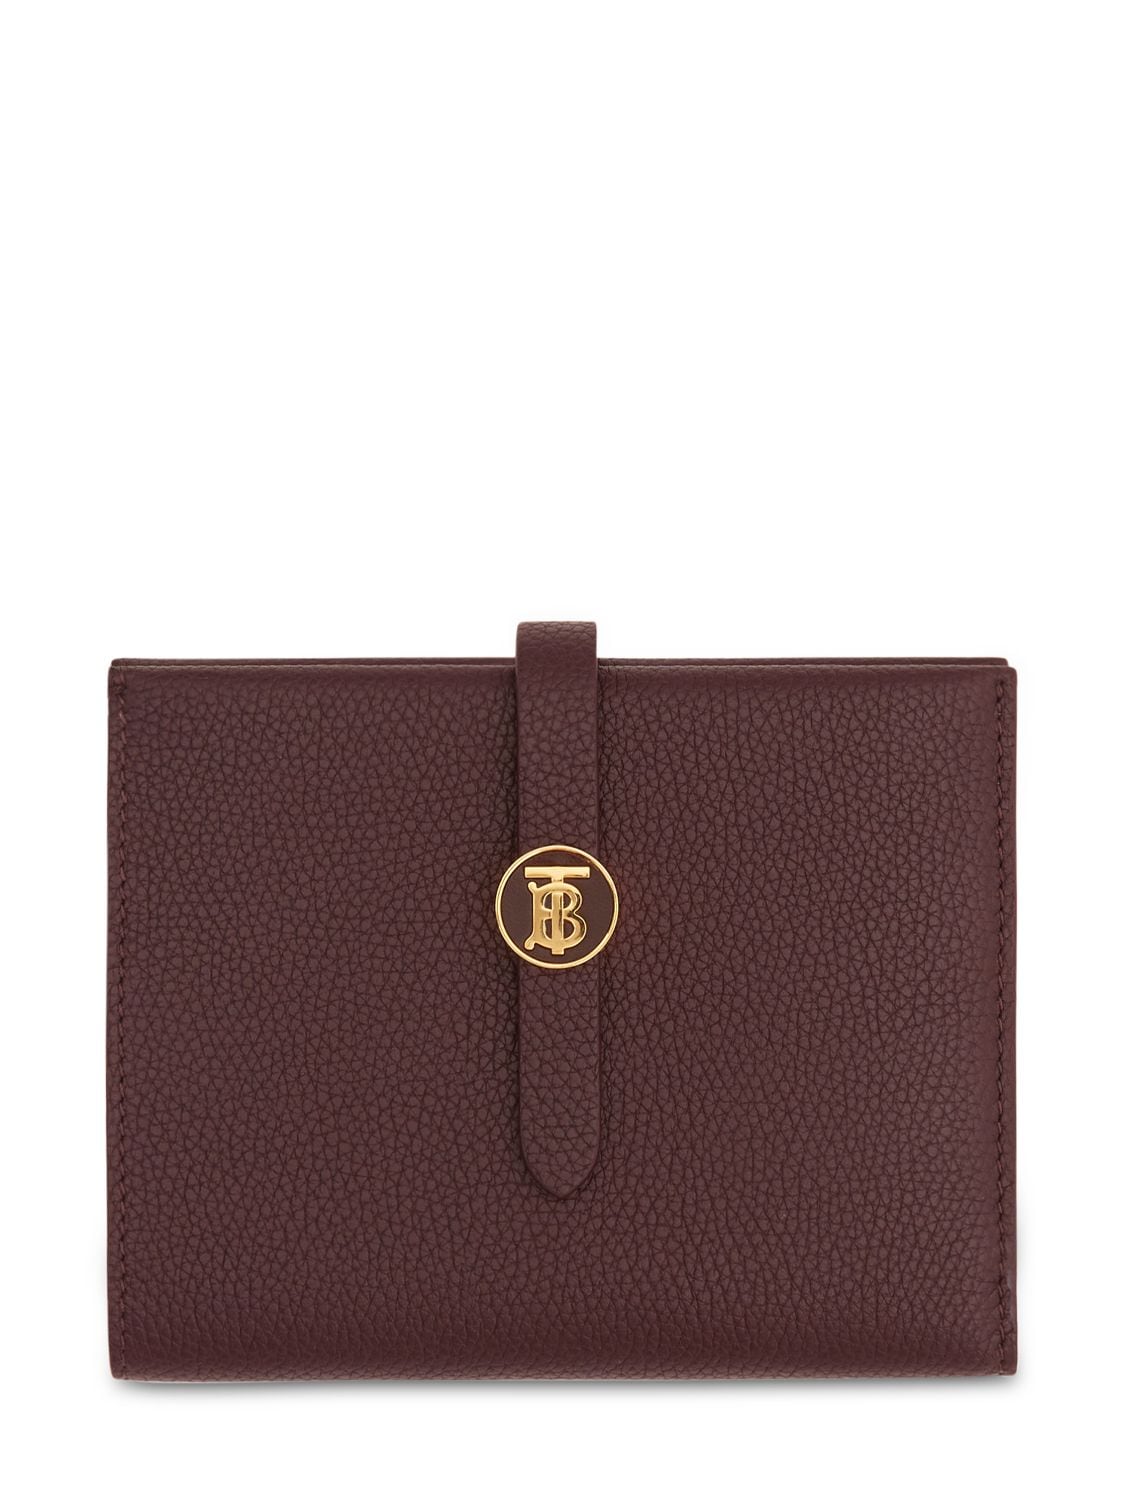 Burberry Monogram Motif Grainy Leather Folding Wallet In Brown